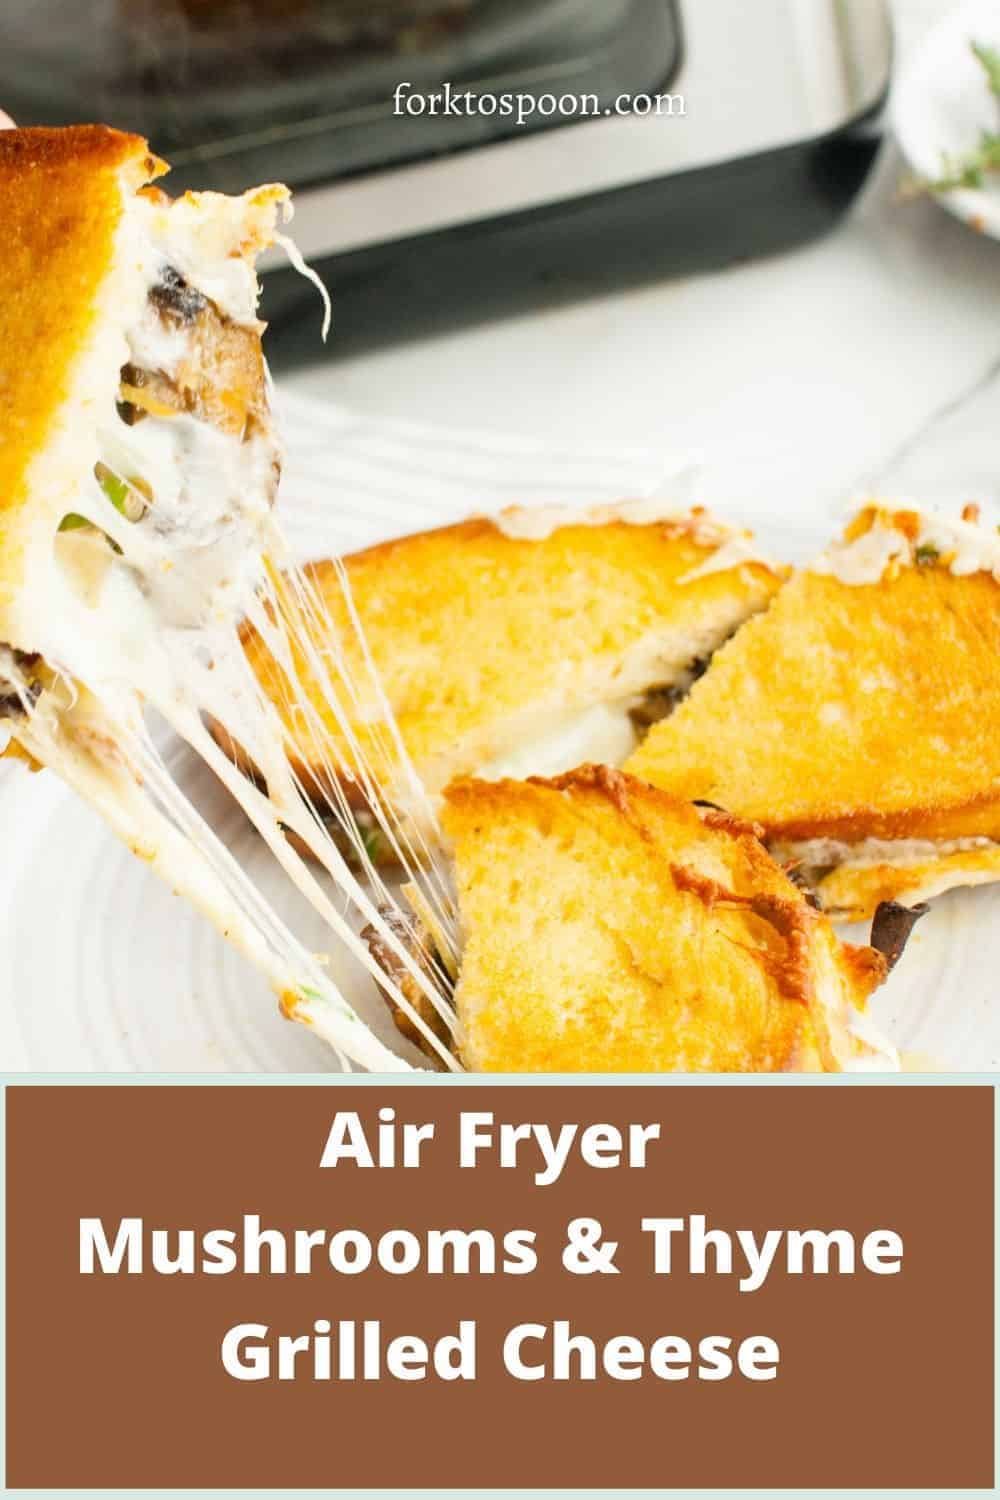 https://forktospoon.com/wp-content/uploads/2021/08/Air-Fryer-Mushrooms-Thyme-Grilled-Cheese-1.jpg